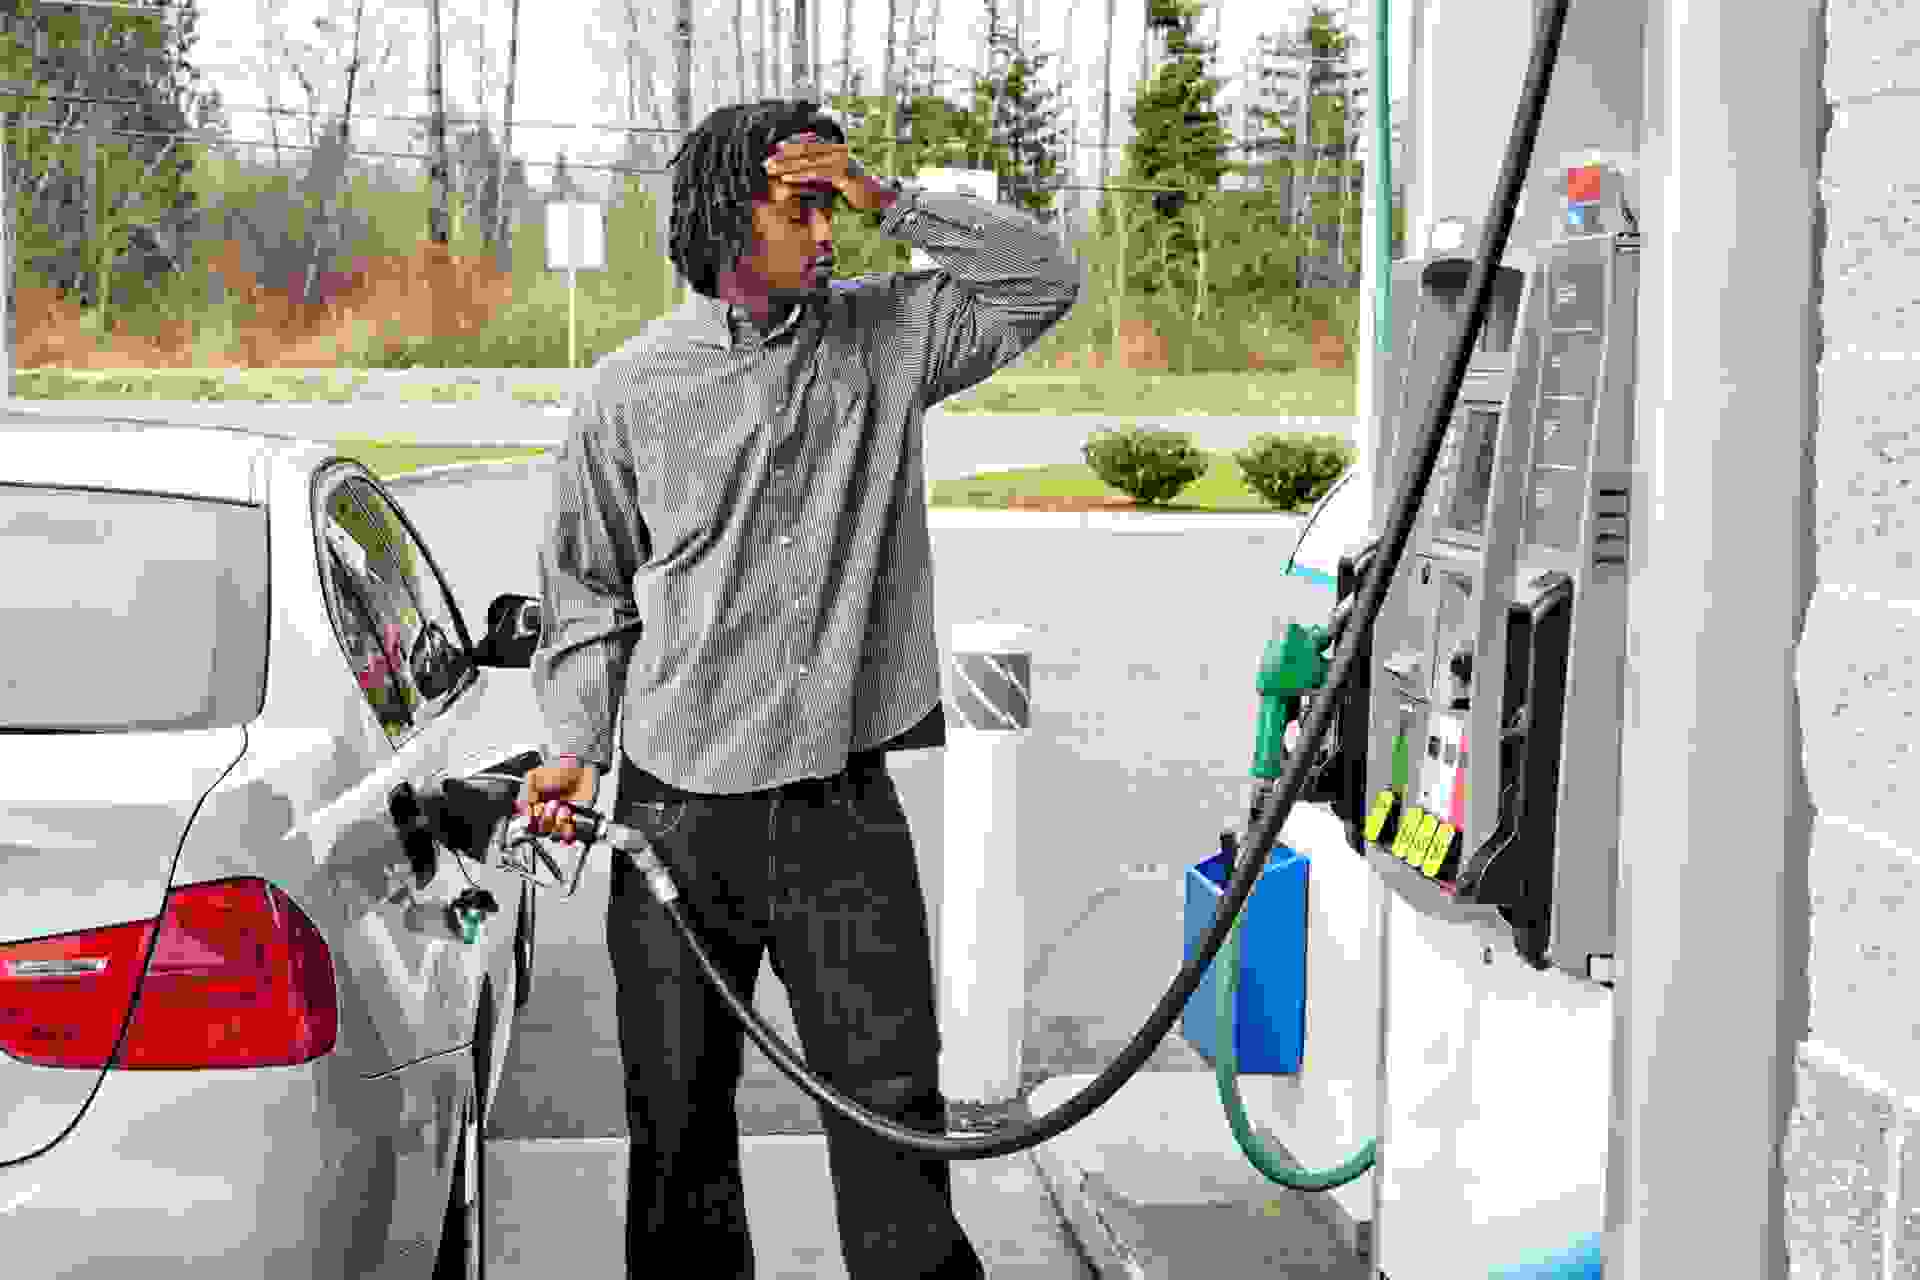 "Photo of a young man watching filling his gas tank, watching in disbelief as the dollar amount climbs on the gas pump display too quickly to comprehend.